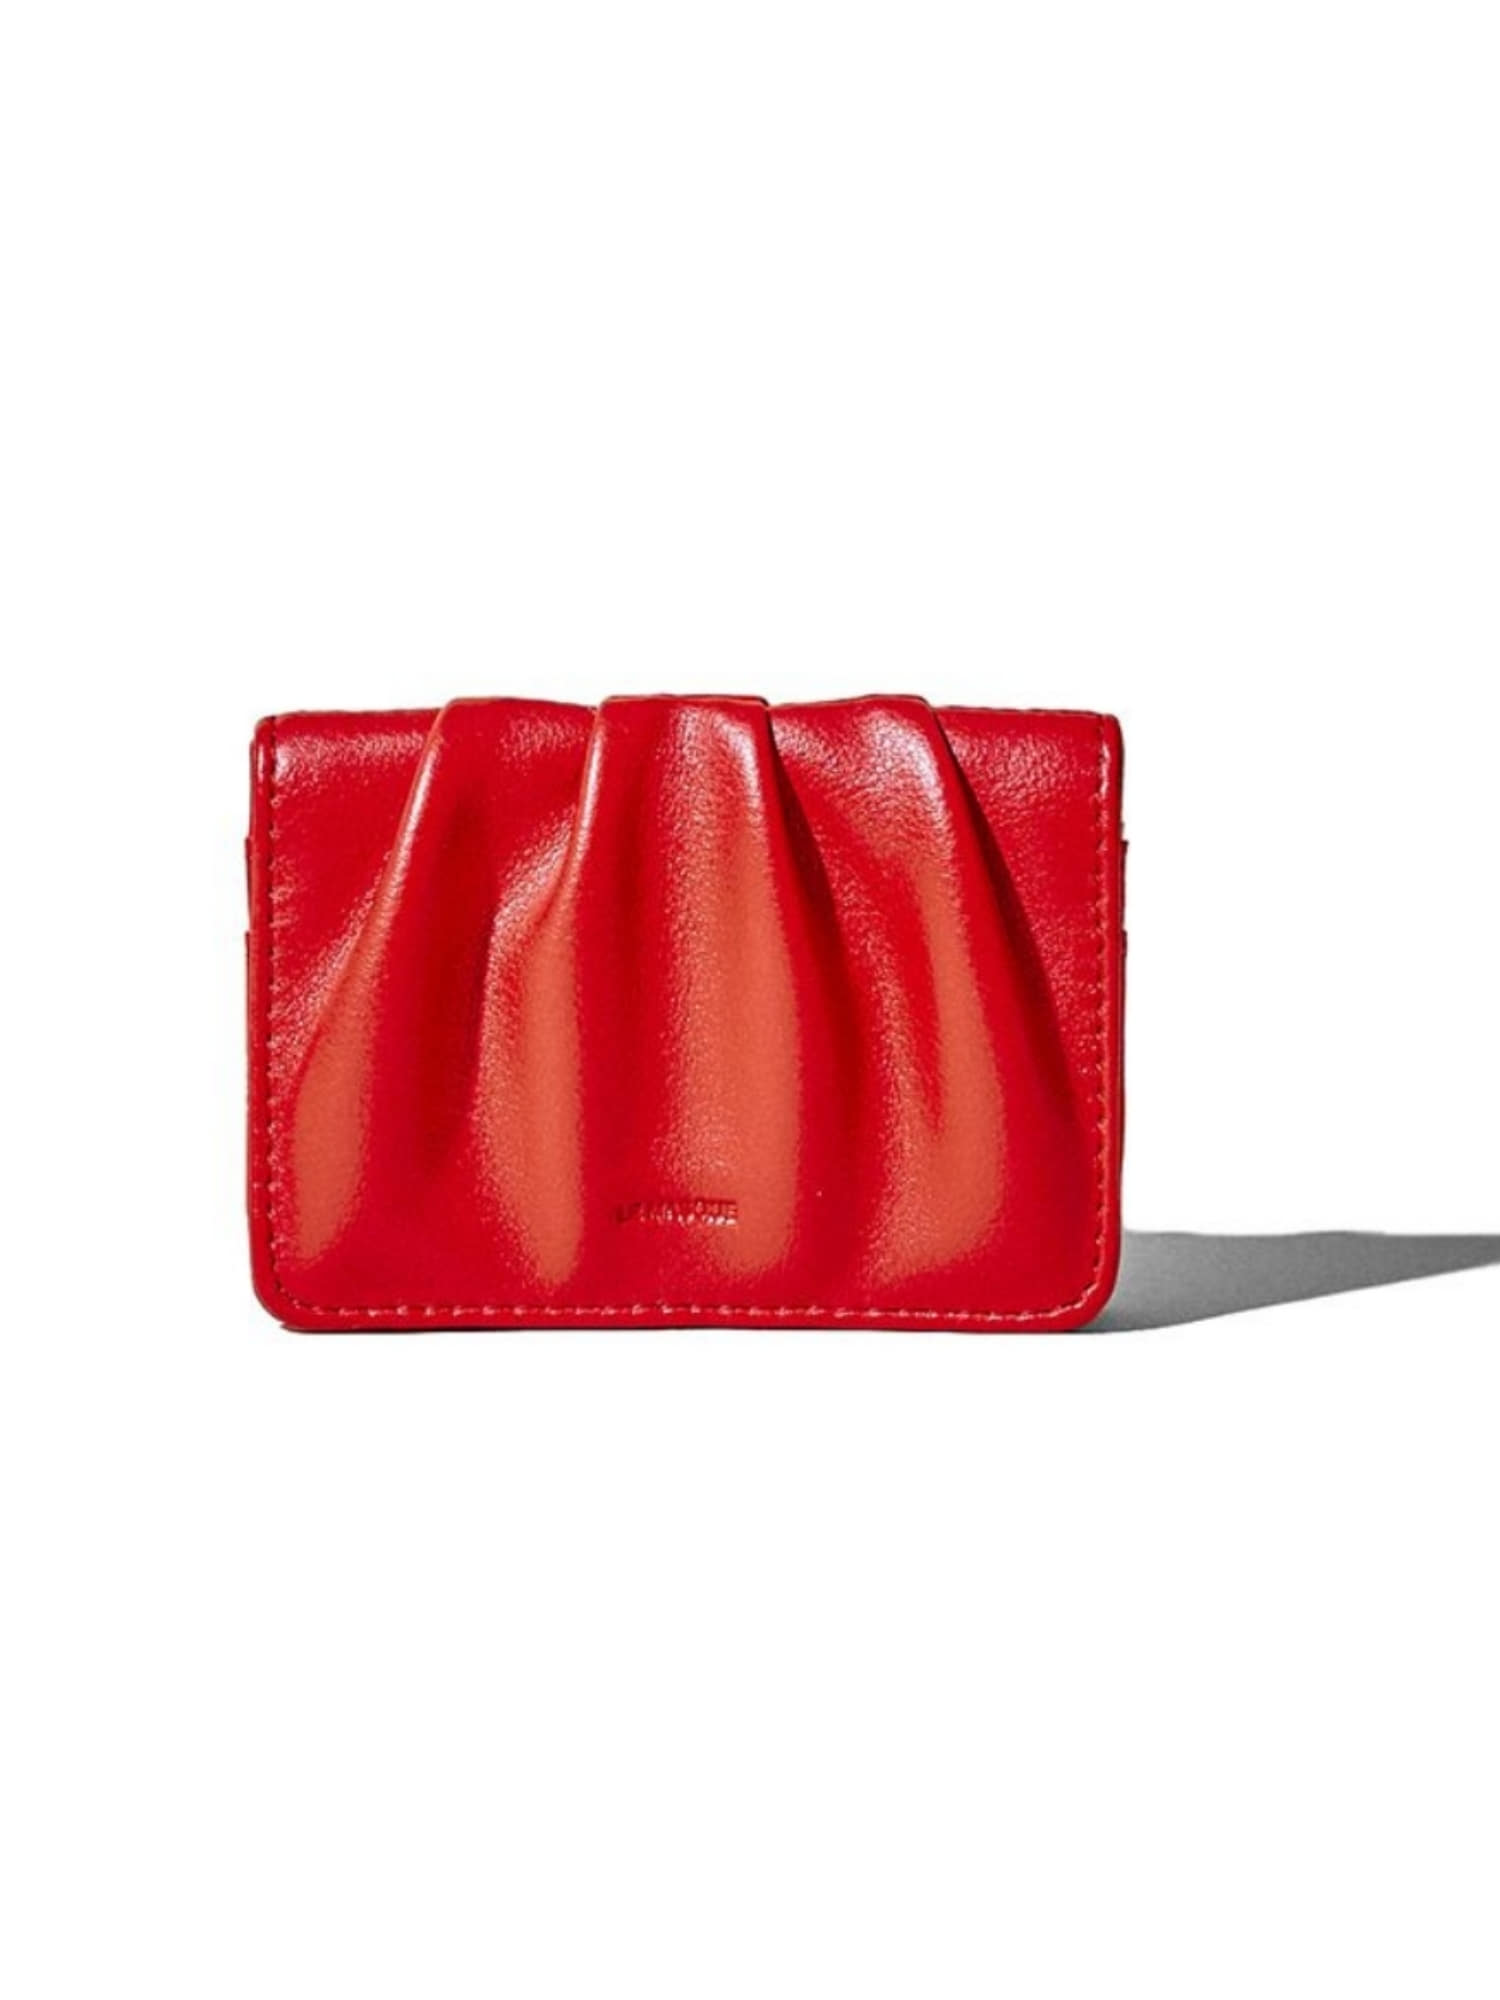 DOUGH Soft Leather Card Case Wallet - Red